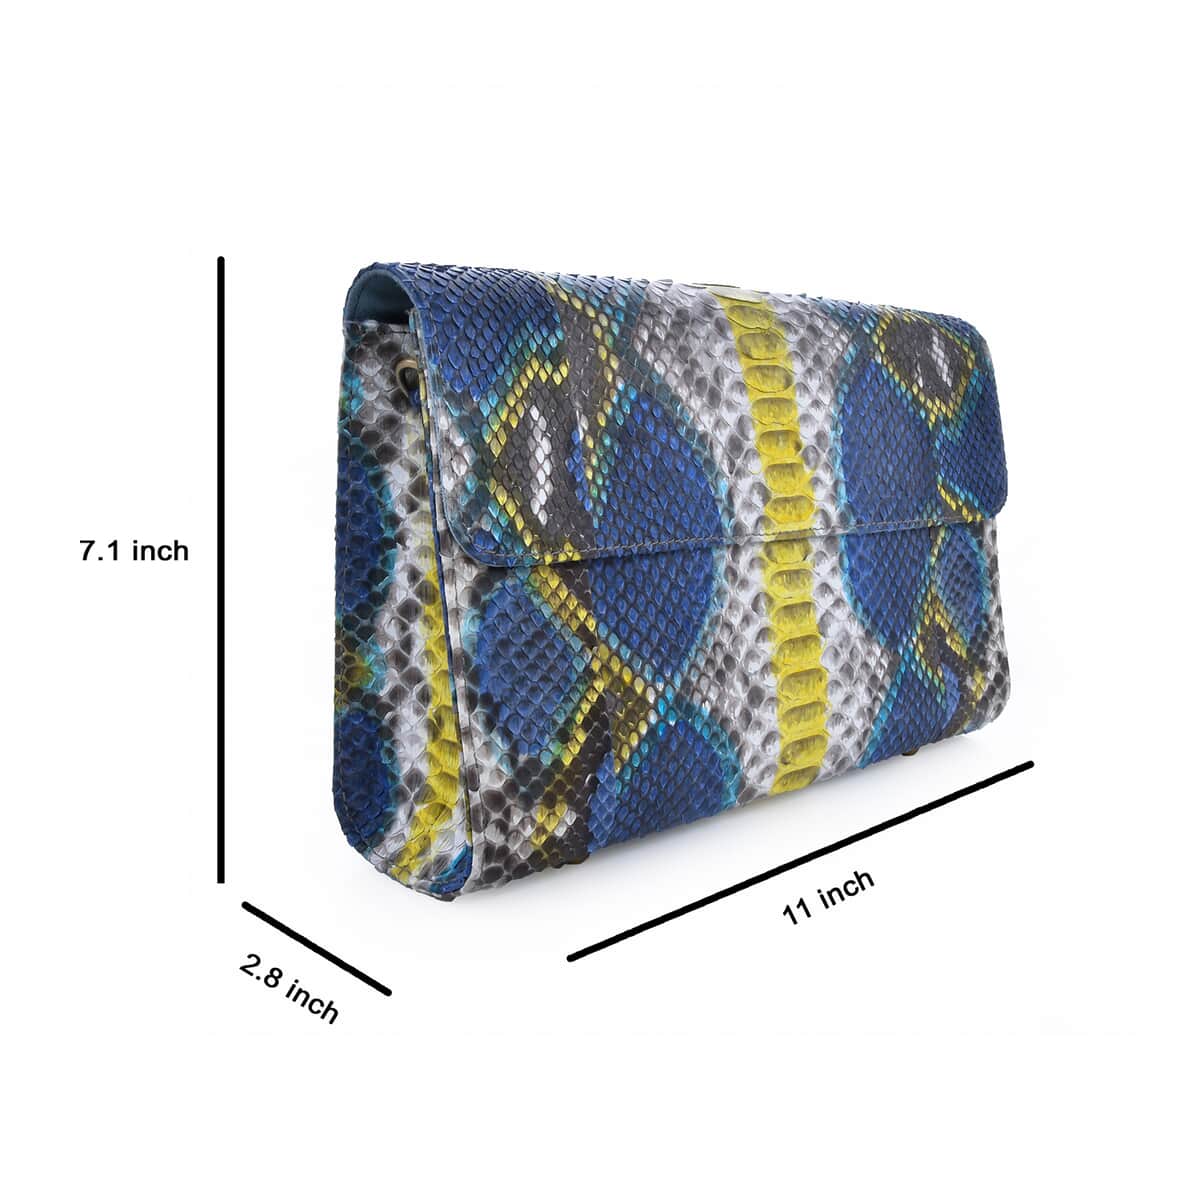 The Pelle Collection Peacock Blue Python Leather Evening Clutch Bag with Detachable Strap, Clutches for Women, Leather Handbag, Clutch Purse image number 6